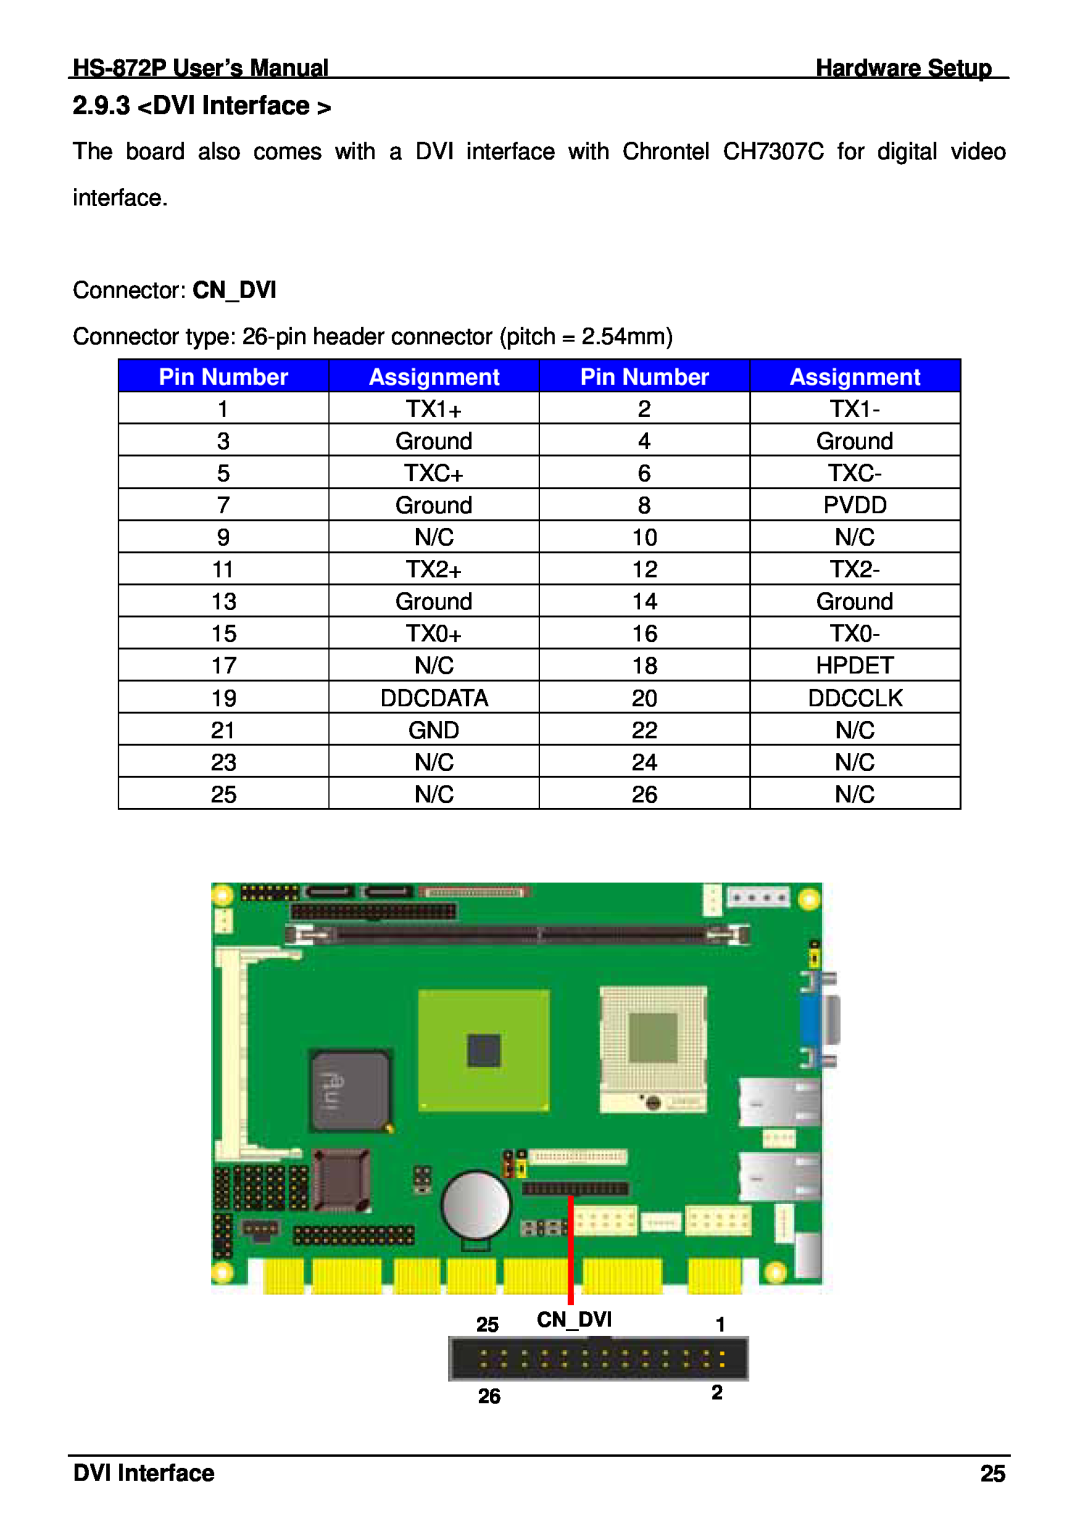 Intel half-size single board computer, HS-872P user manual DVI Interface, Pin Number, Assignment, Cndvi 